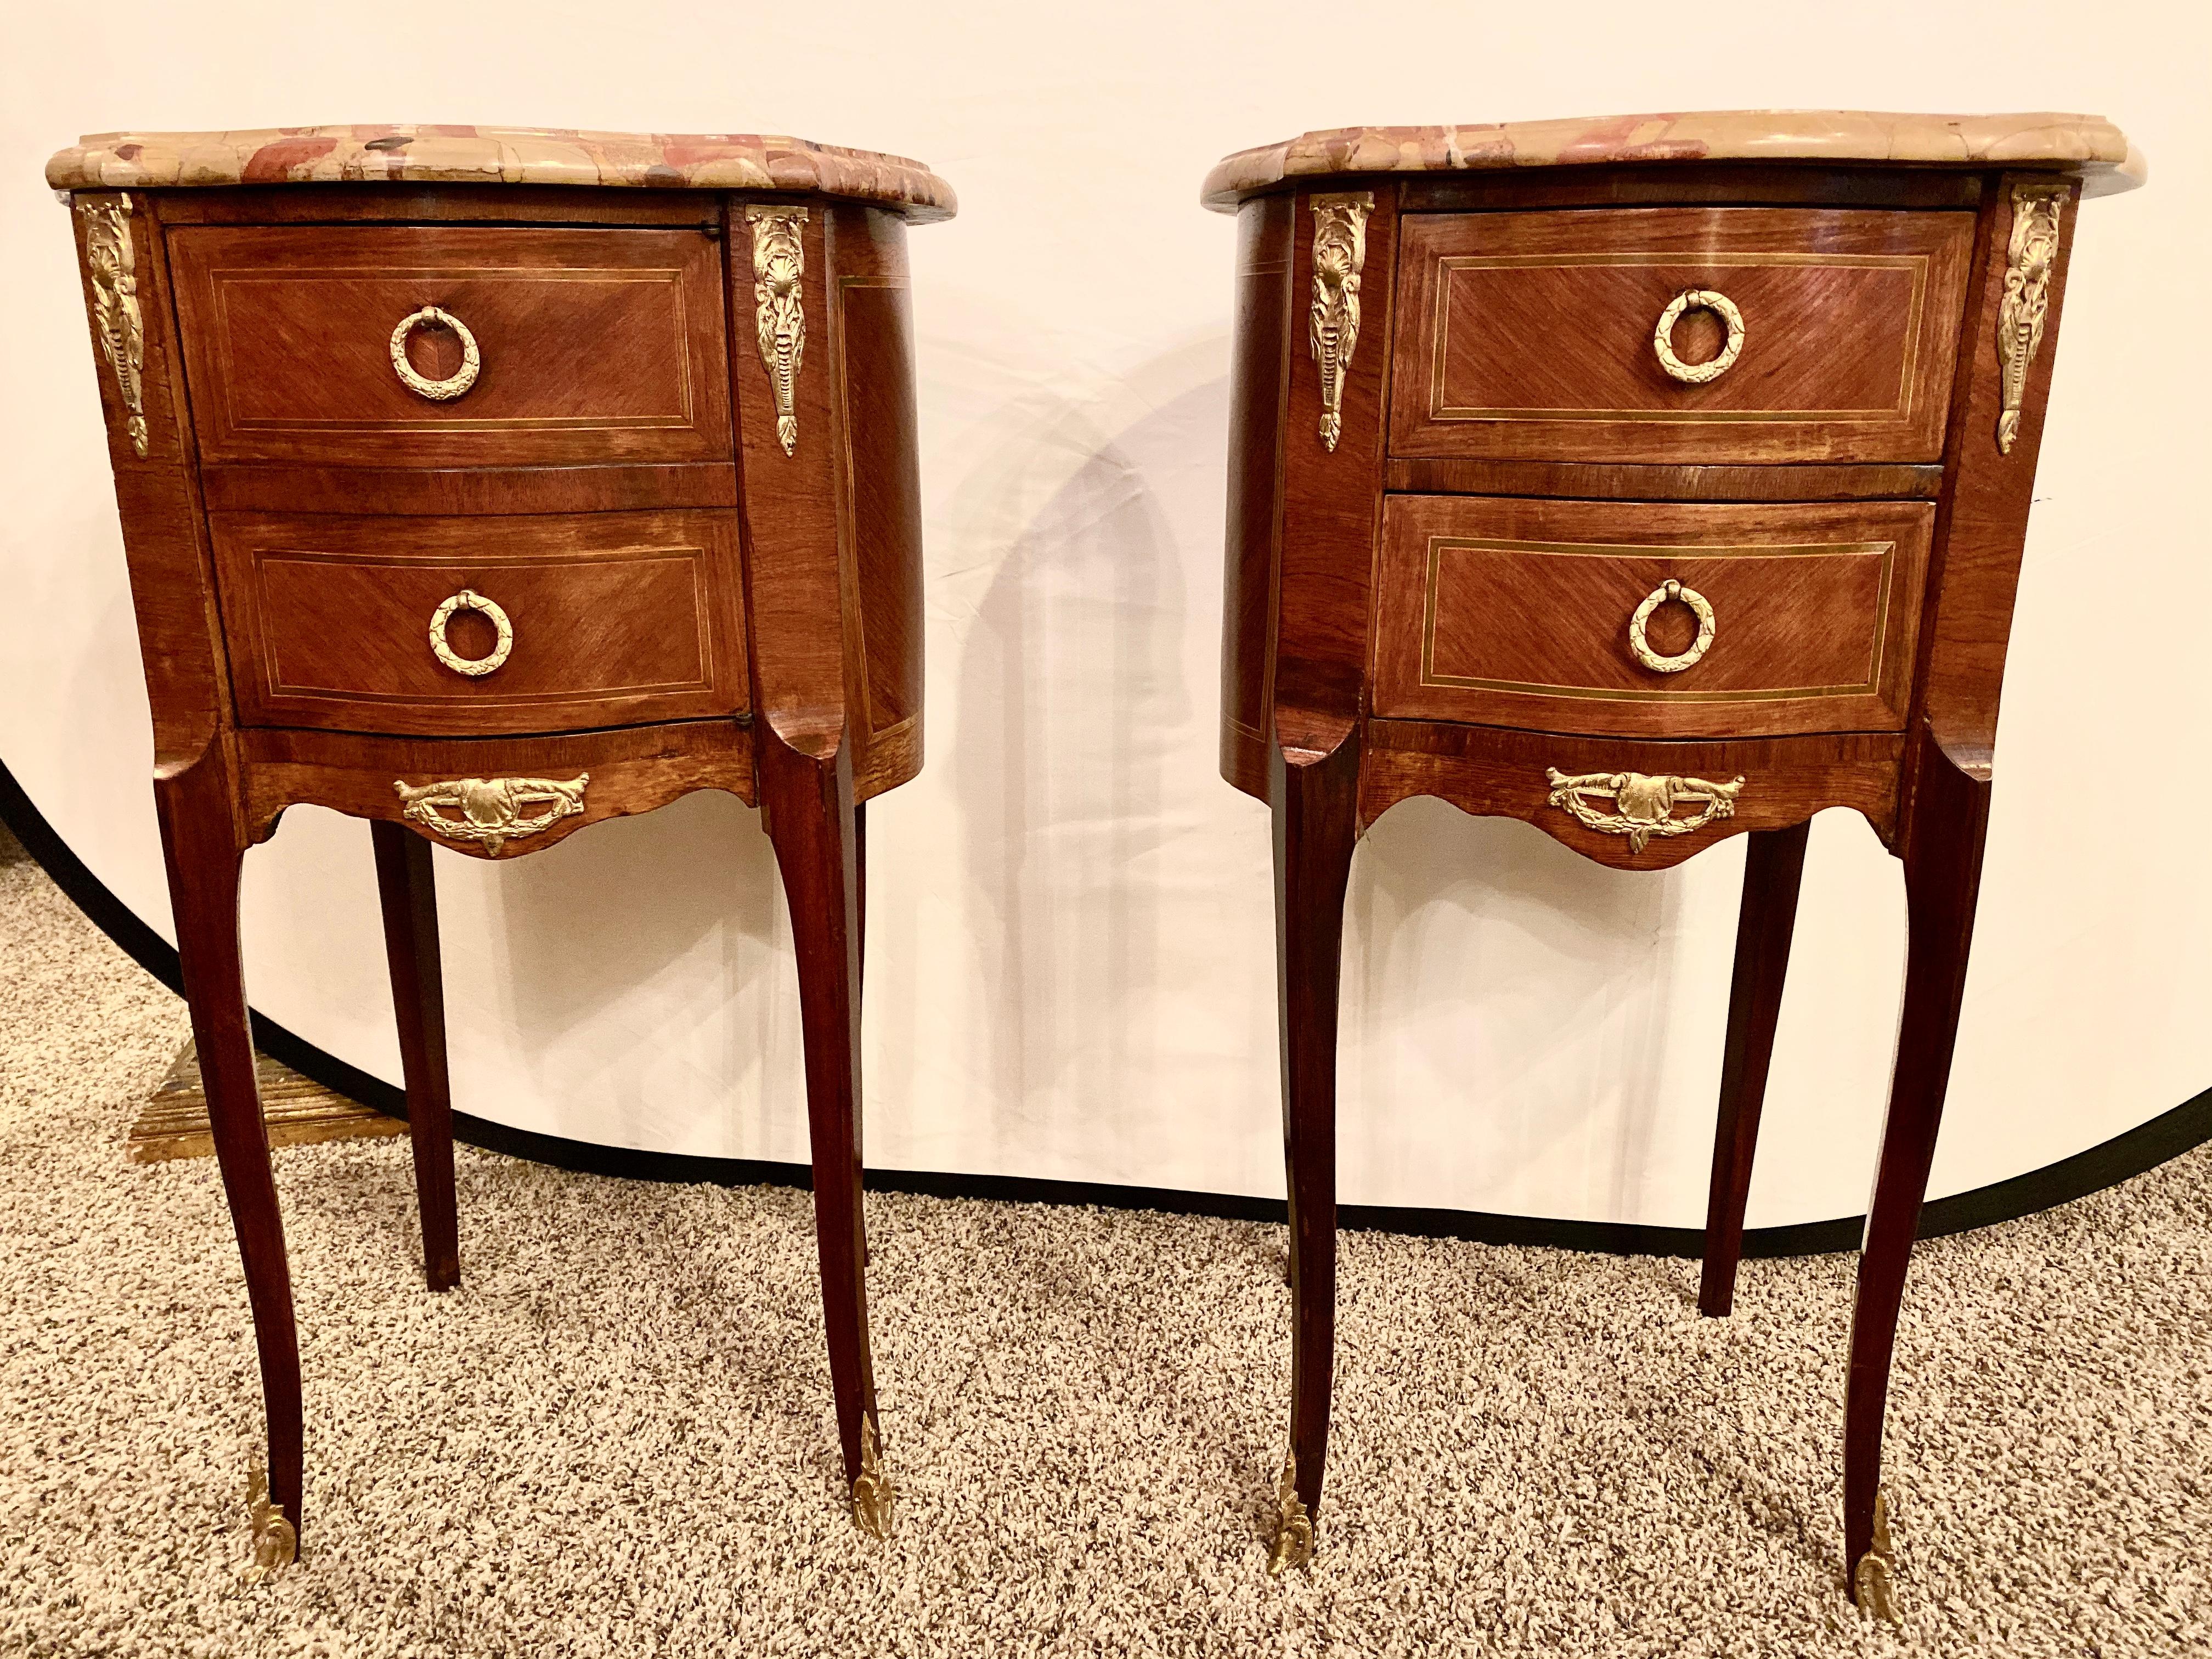 Pair of Louis XV style side / end tables with Breche D'alep original marble tops and bronze mounts. One table with two drawers, the other with front faux drawers to a cupboard, Late 19th century.
hSX.